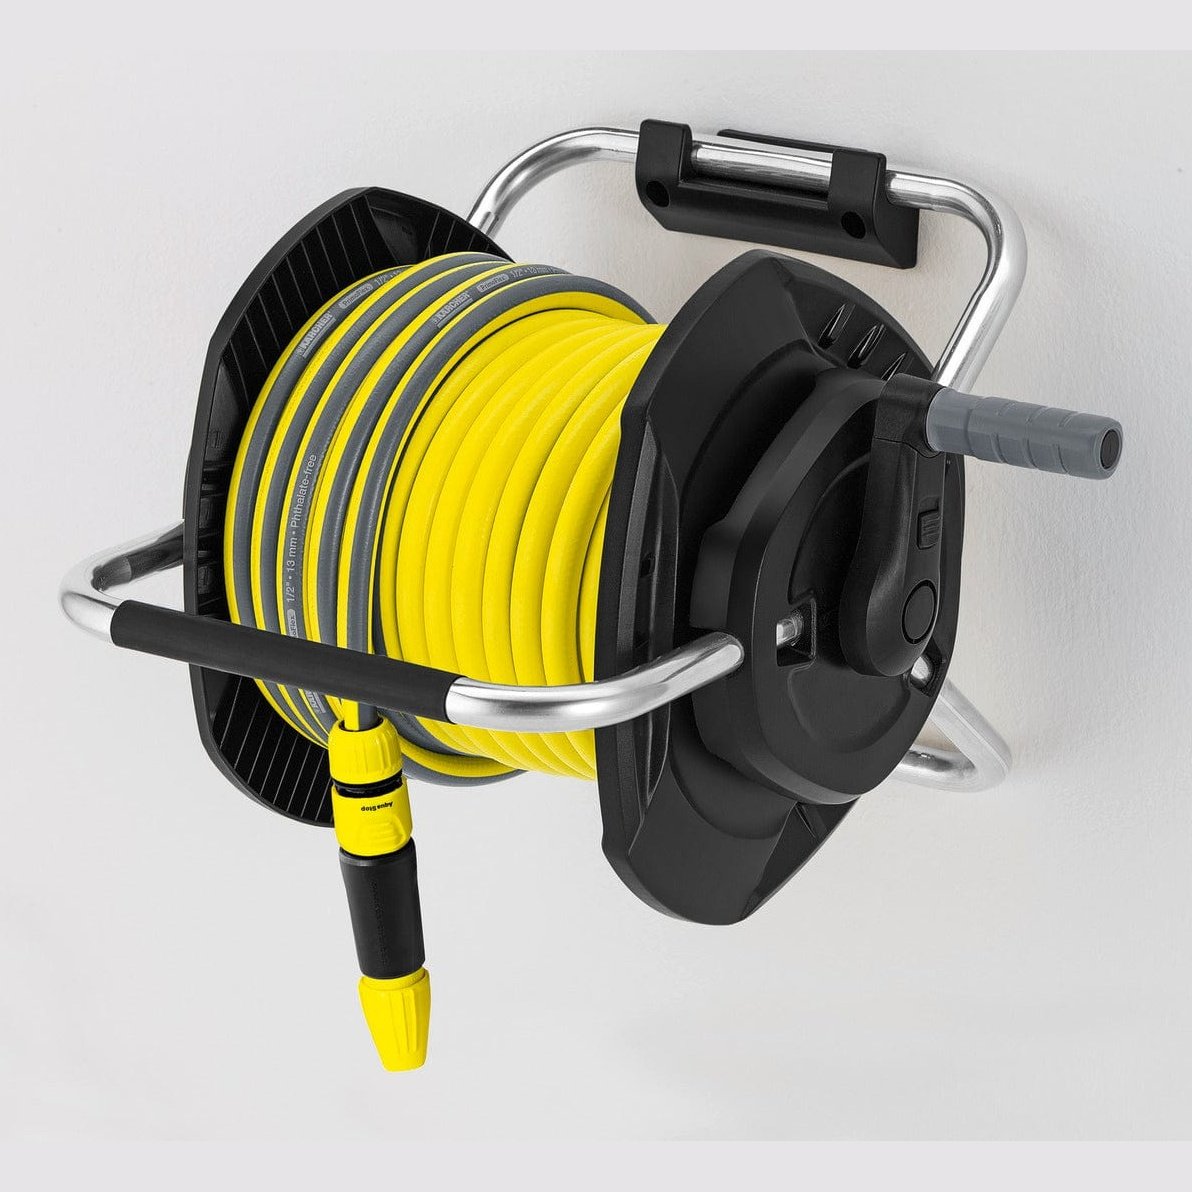 Karcher Wall Hose Reel Kit 1⁄2" 25m - HR 4.525 | Supply Master | Accra, Ghana Cleaning Equipment Accessories Buy Tools hardware Building materials